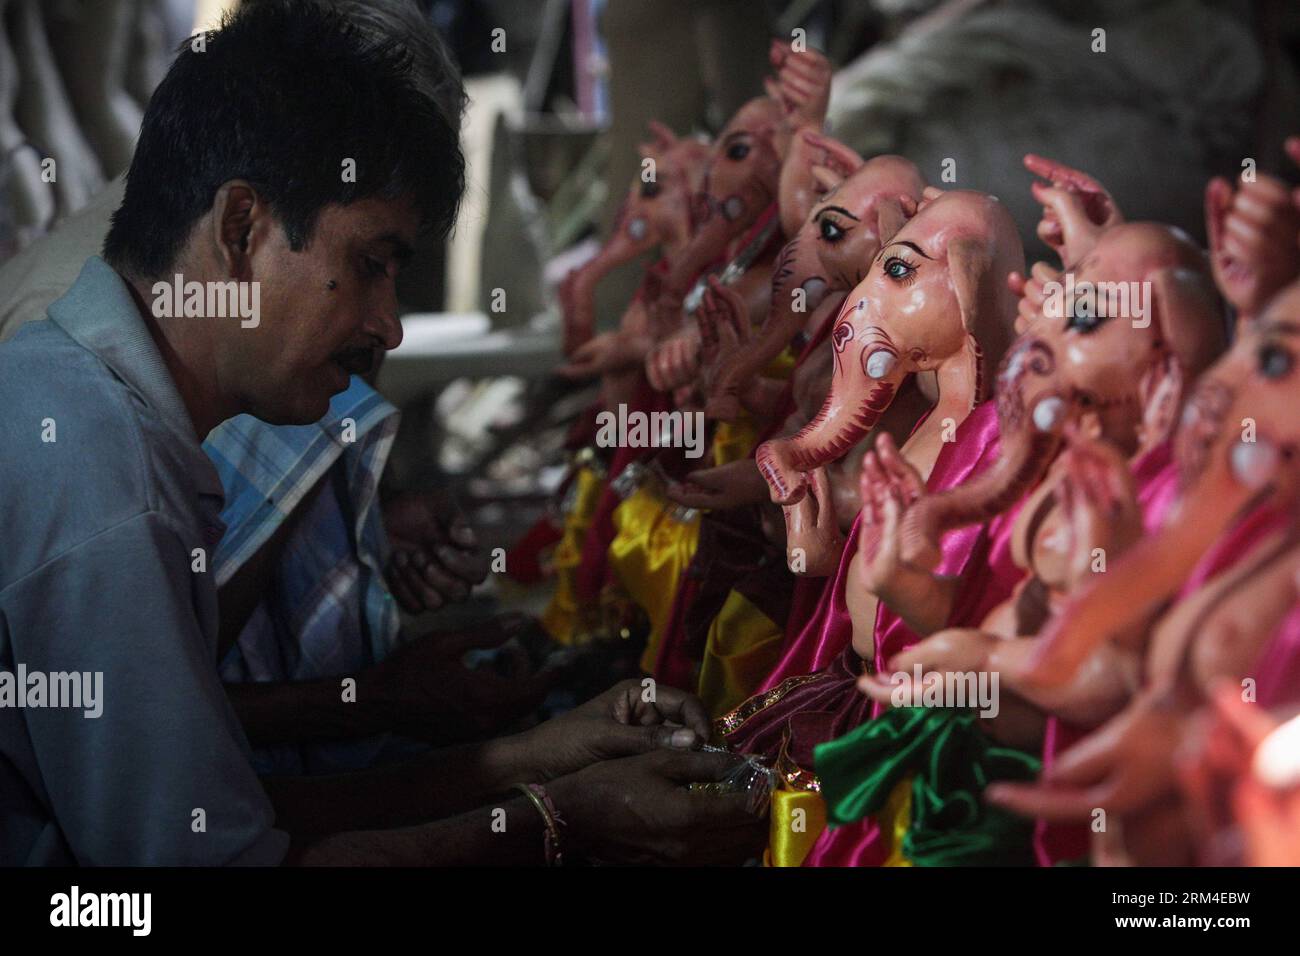 Bildnummer: 60444135  Datum: 07.09.2013  Copyright: imago/Xinhua An Indian artist works on an idol of elephant-headed Hindu God Ganesha ahead of Ganesh Chaturthi festival at a workshop in New Delhi, India, Sept. 7, 2013. Ganesh Chaturthi festival, which begins from Sept. 9, is celebrated as the birthday of Lord Ganesha who is widely worshiped by Hindus as the god of wisdom, prosperity and good fortune. (Xinhua/Zheng Huansong)(zcc) INDIA-NEW DELHI-GANESHA CHATURTHI FESTIVAL-PREPARATION PUBLICATIONxNOTxINxCHN xns x0x 2013 quer     60444135 Date 07 09 2013 Copyright Imago XINHUA to Indian Artist Stock Photo